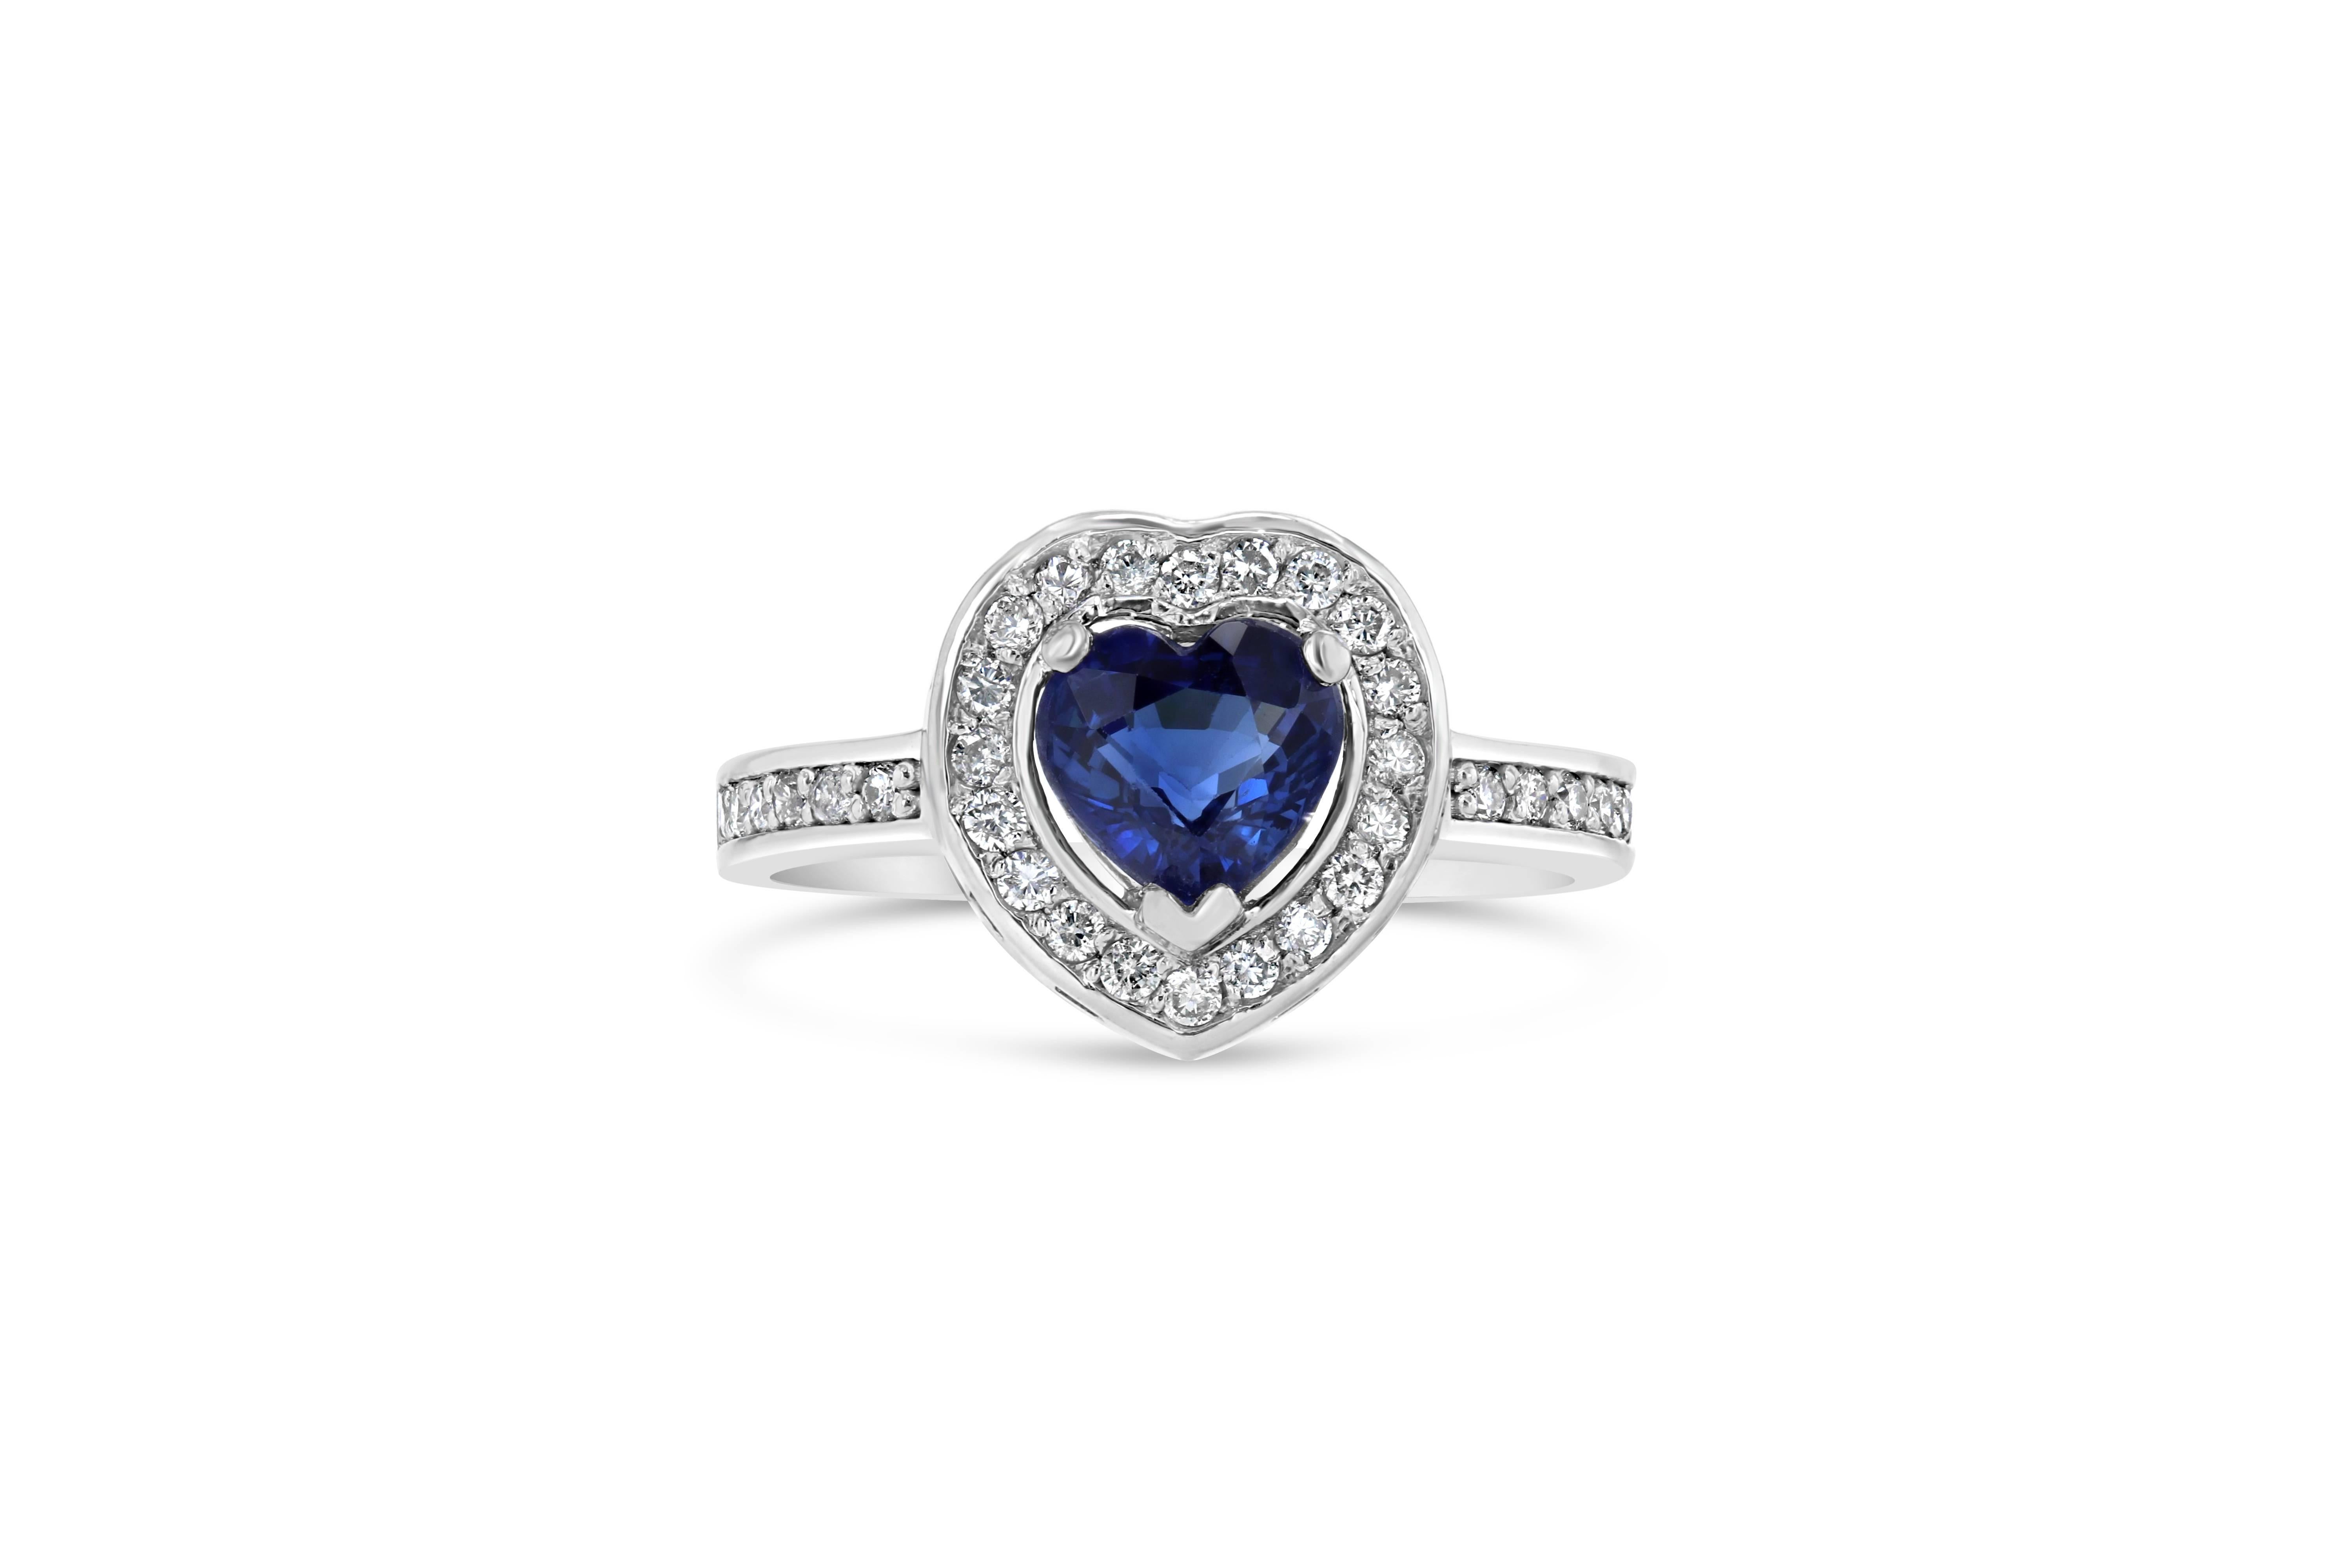 Beautiful Blue Sapphire and Diamond Engagement Ring!  This ring has a 1.18 carat Heart Cut Blue Sapphire in the center of the ring and is surrounded by 32 Round Cut Diamonds that weigh 0.31 carats.  This ring is casted in 14K White Gold and weighs